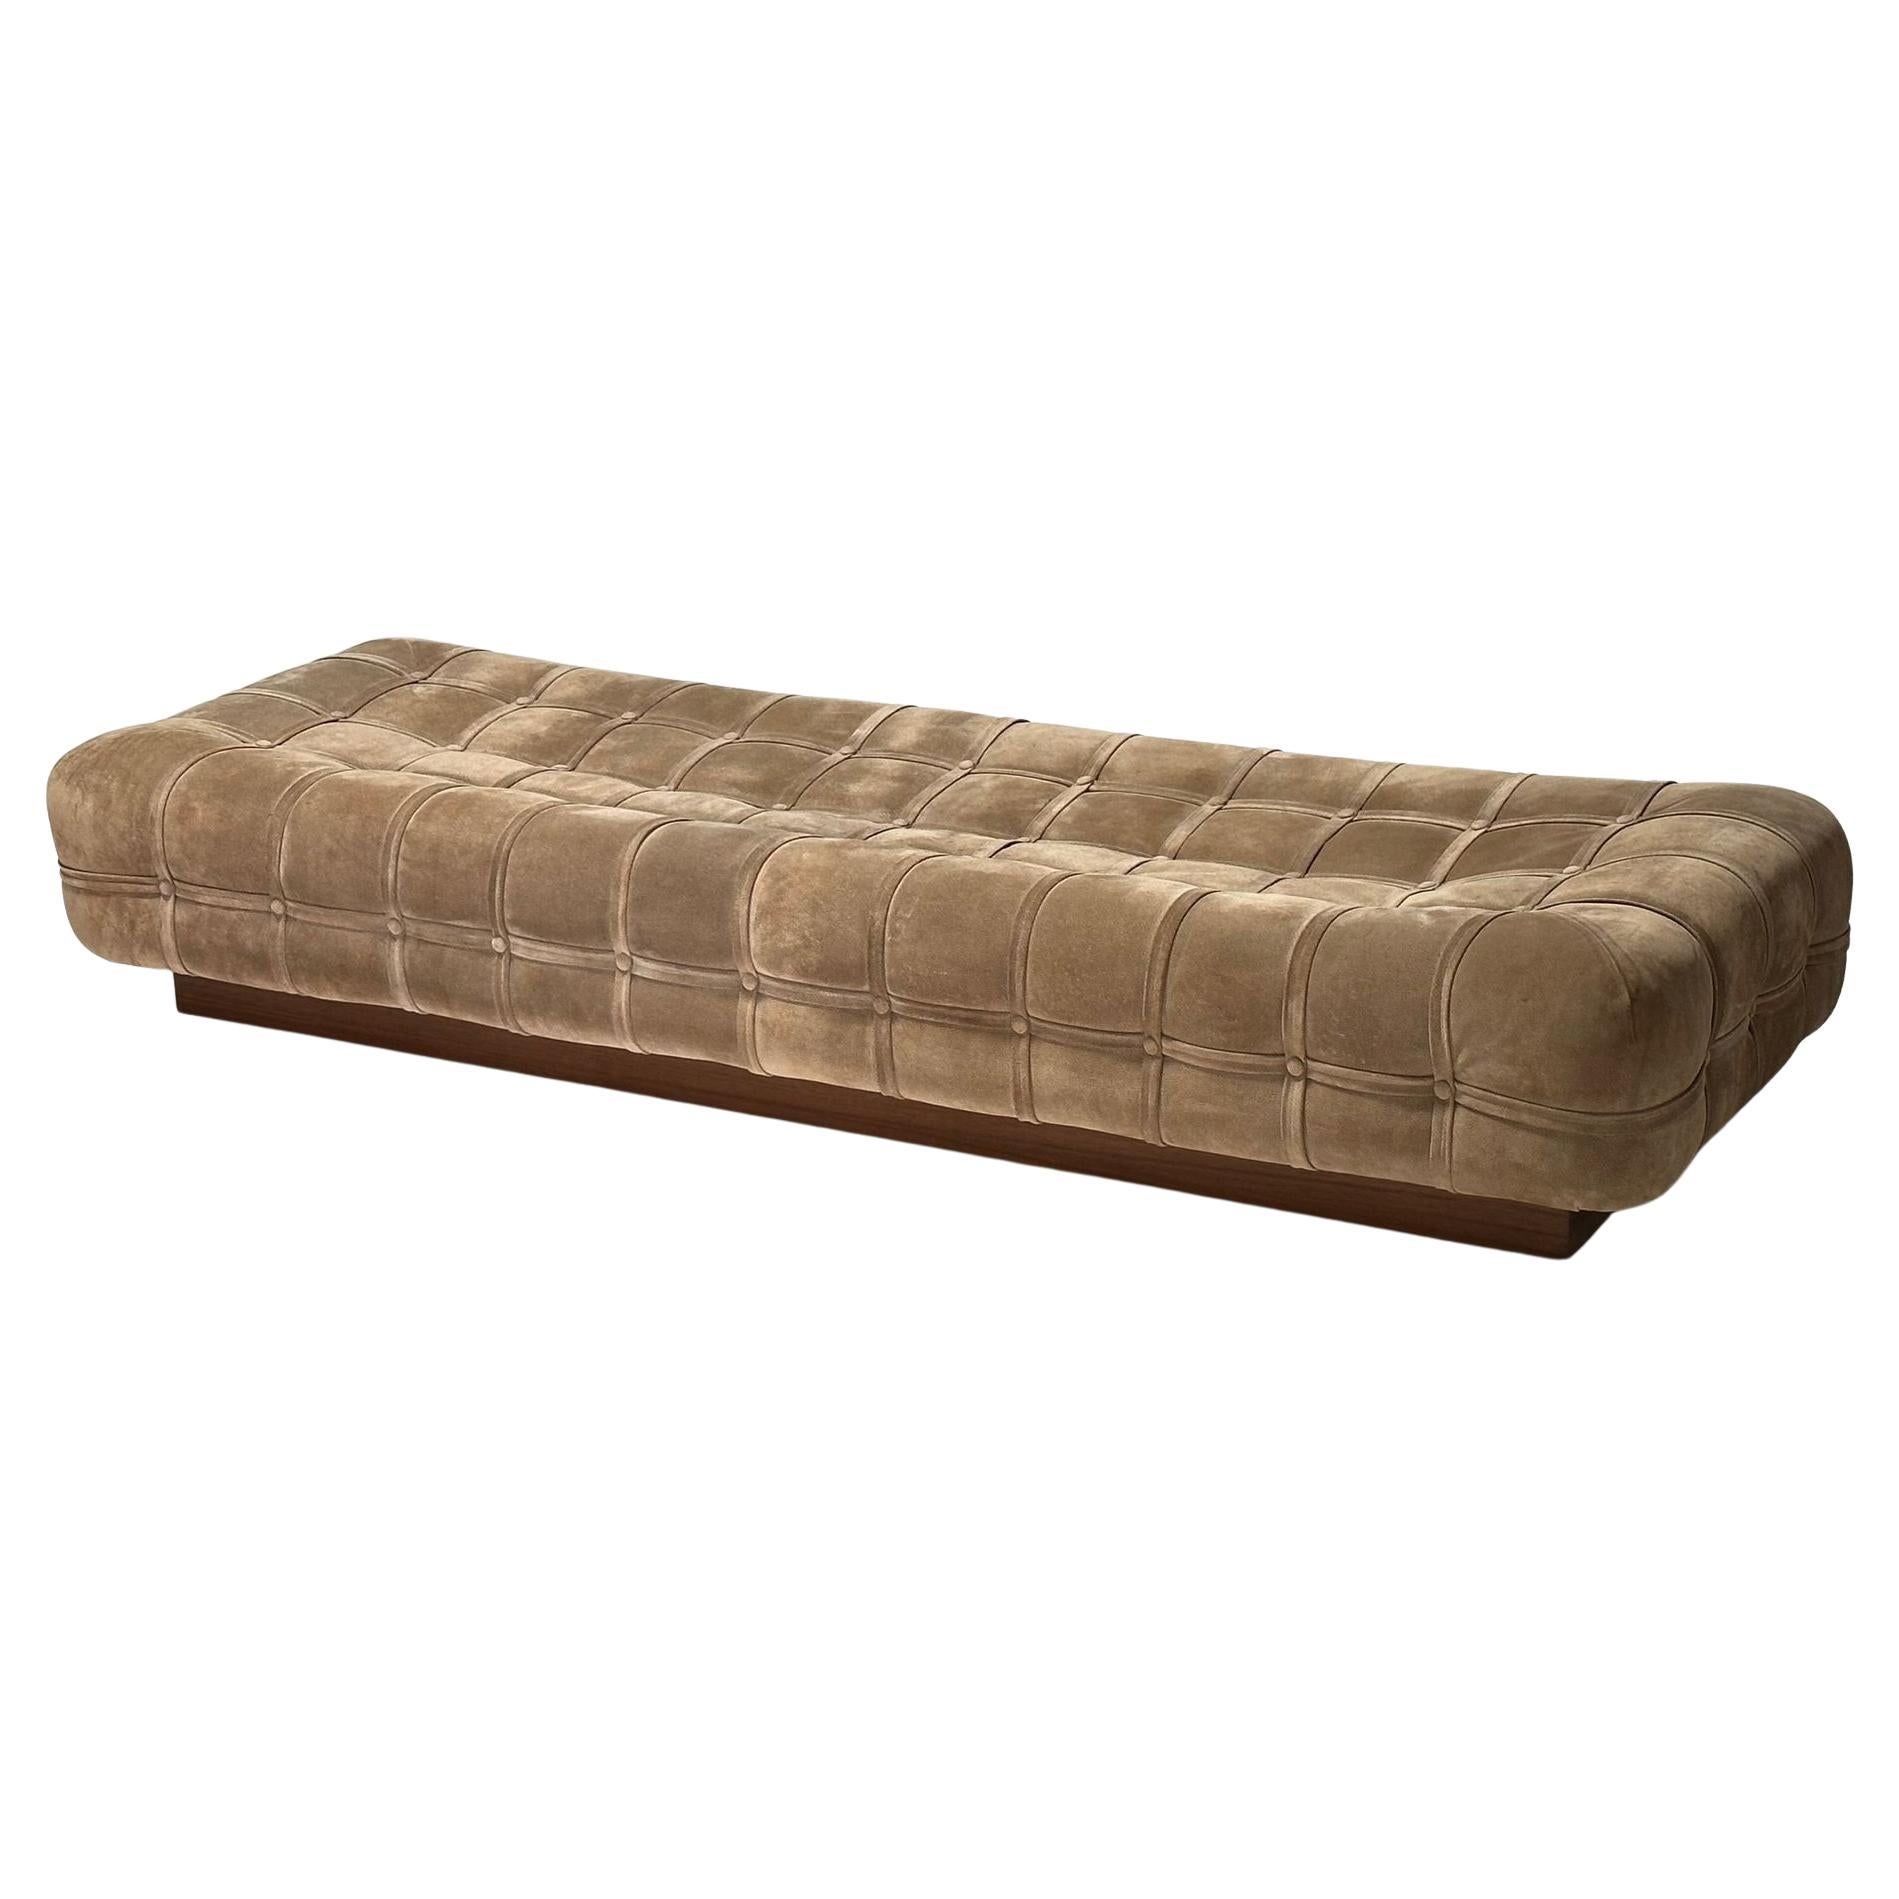 Suede Marshmallow Pouf Bench/ Daybed on Walnut Plinth Base, 1970 For Sale